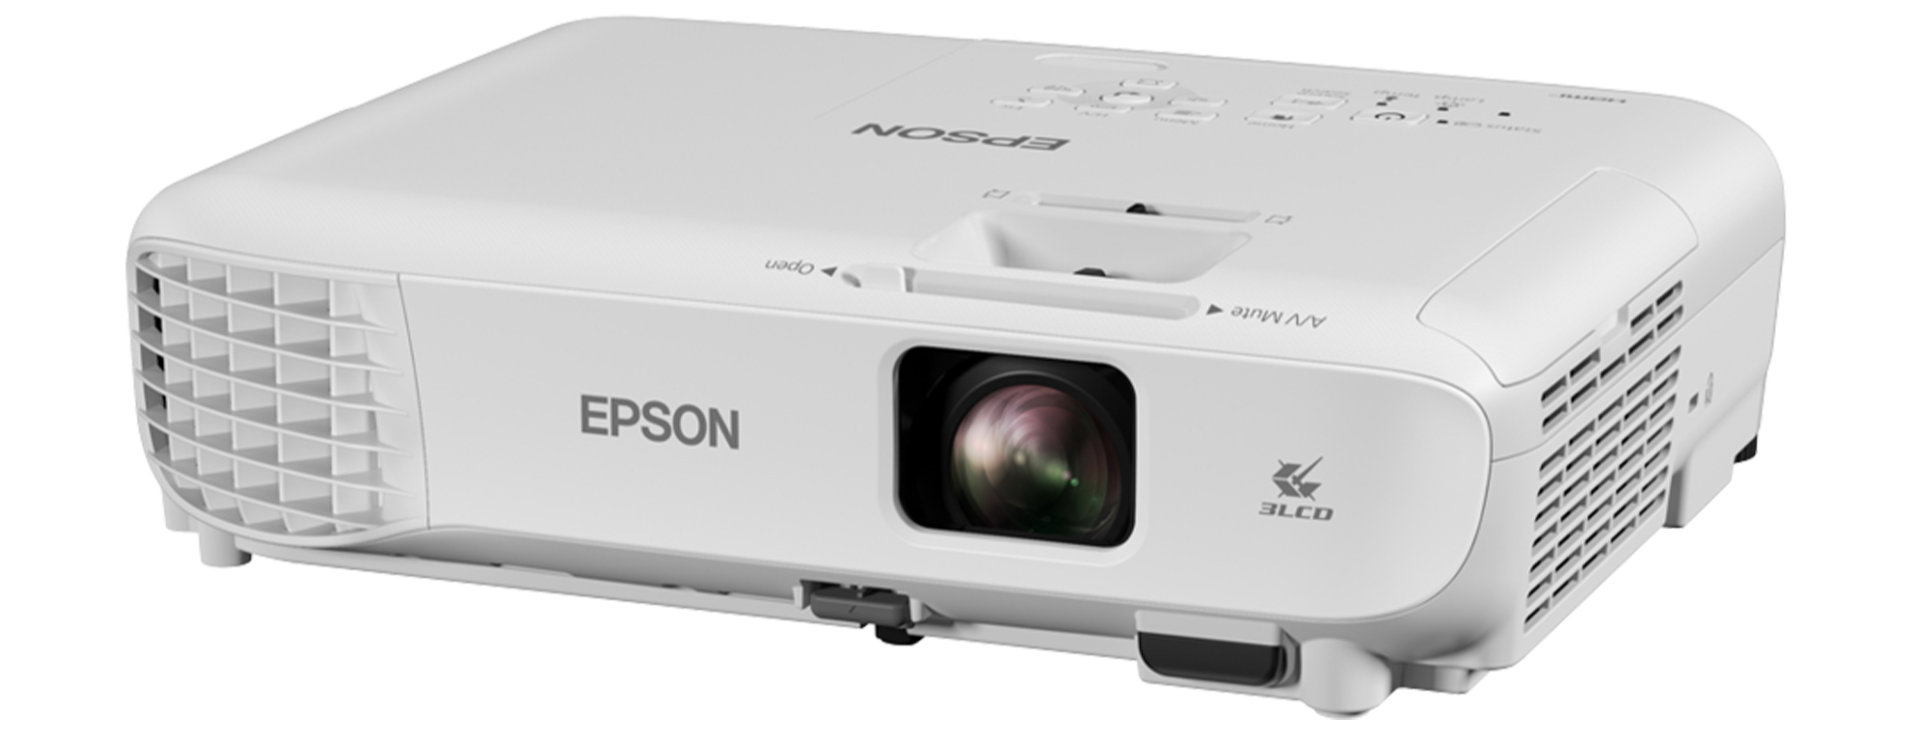 EPSON Projector 1785w